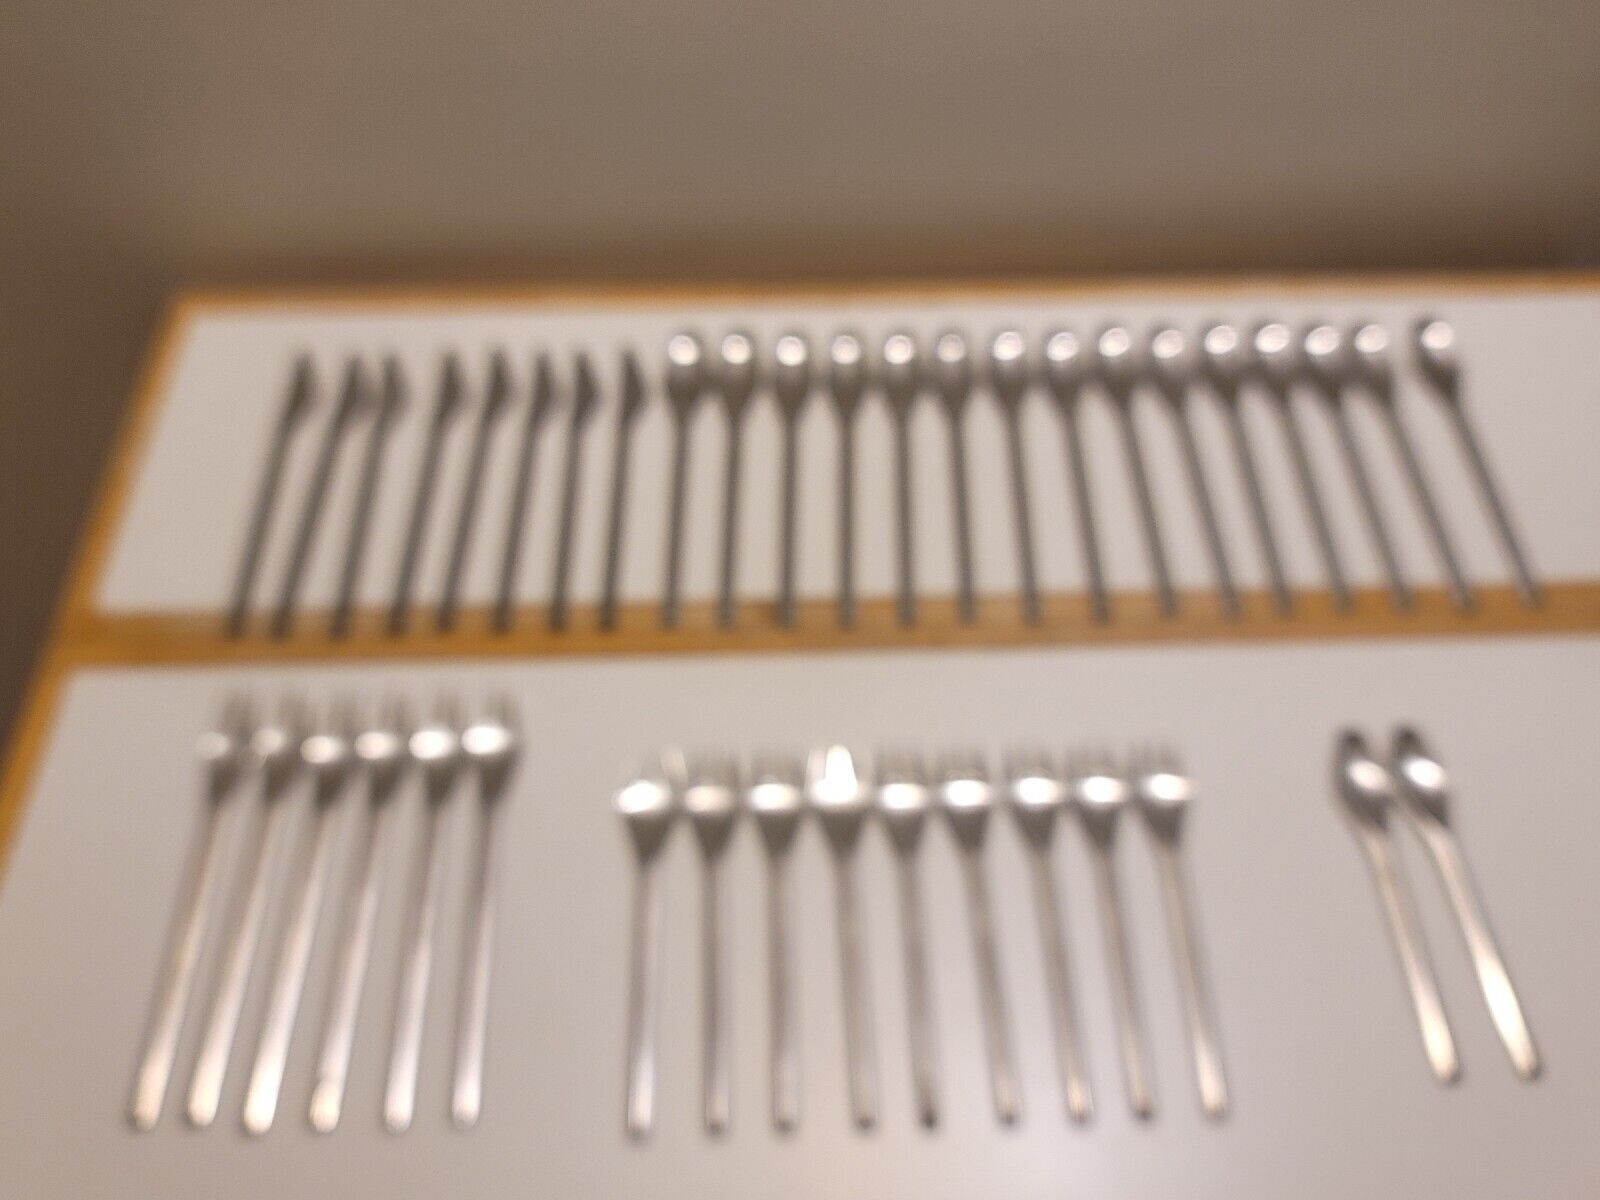 ESM RemaLux Stainless 18/8 Germany ULTRA RARE 40 Pieces Fork KNIFE Spoon 